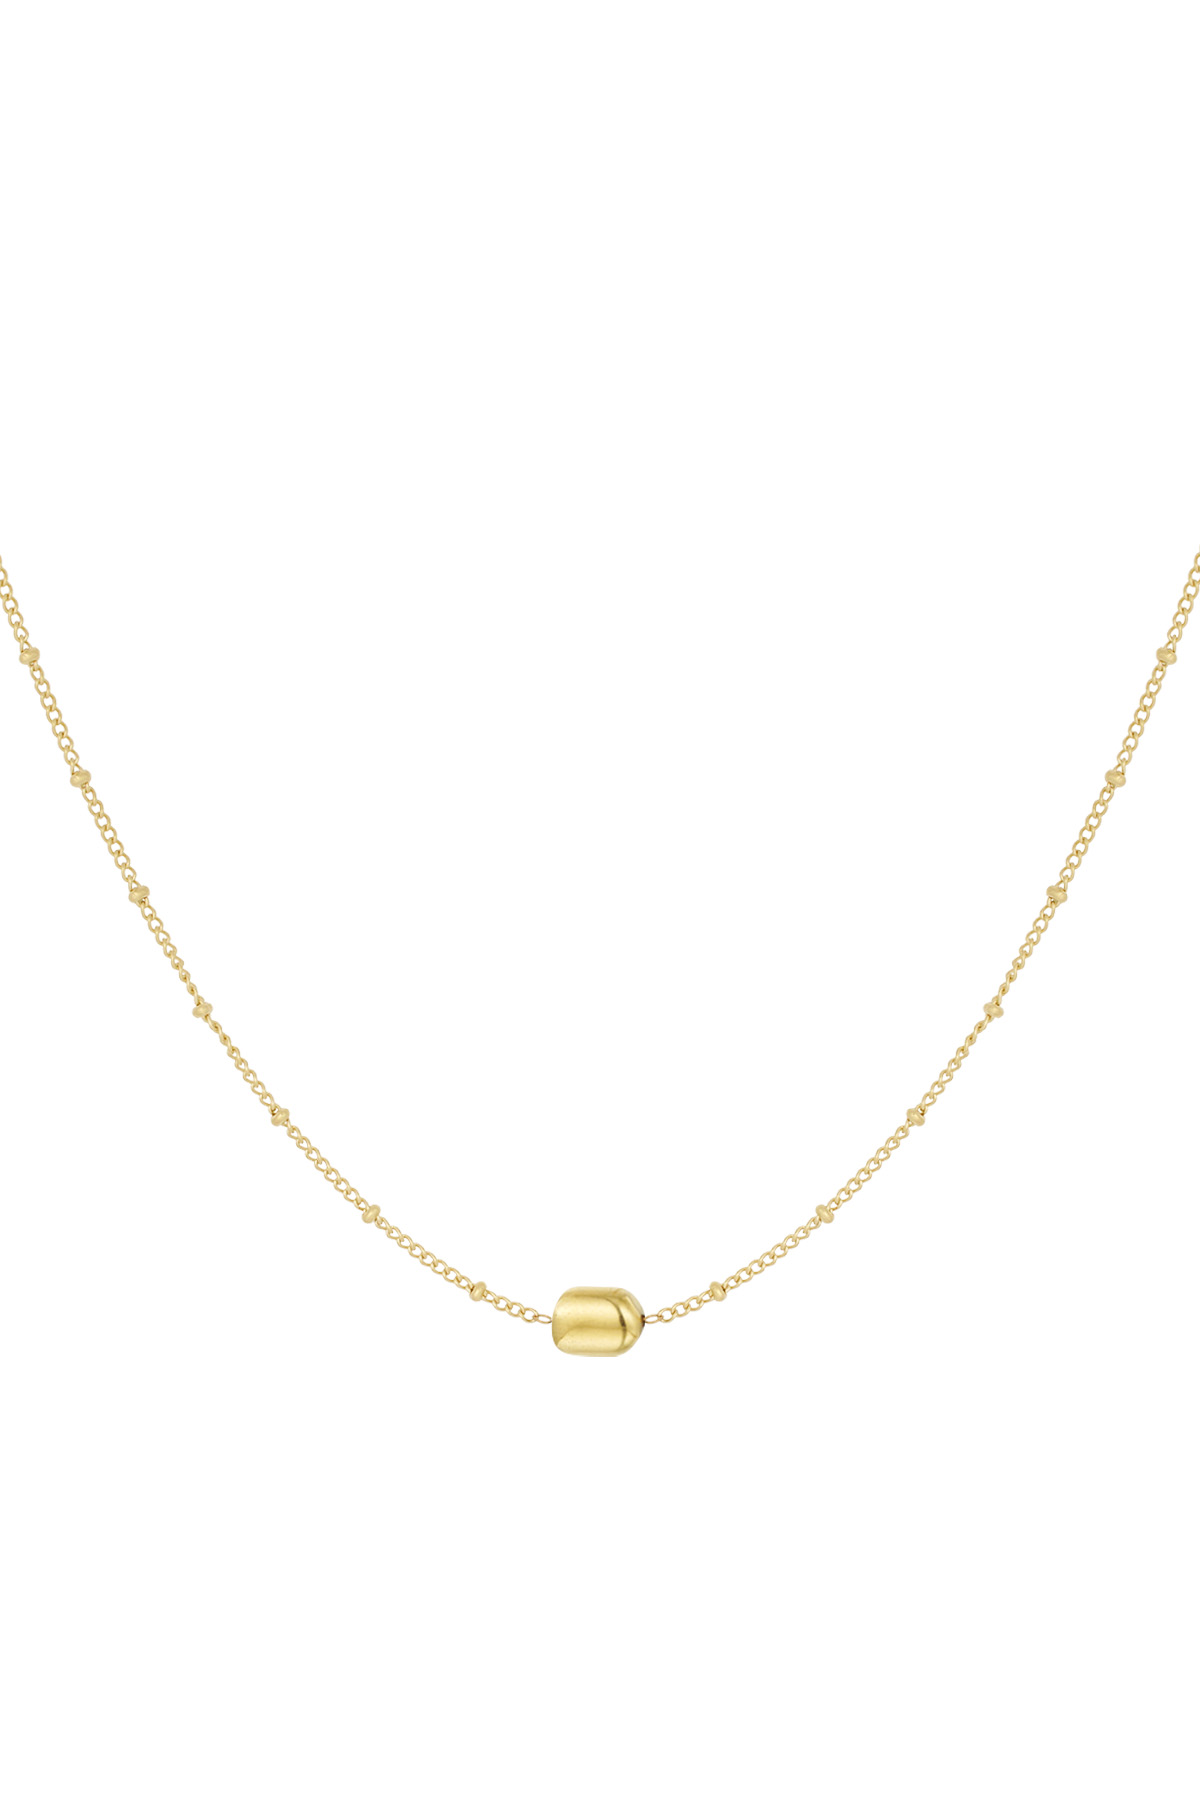 Simple necklace with balls - gold 